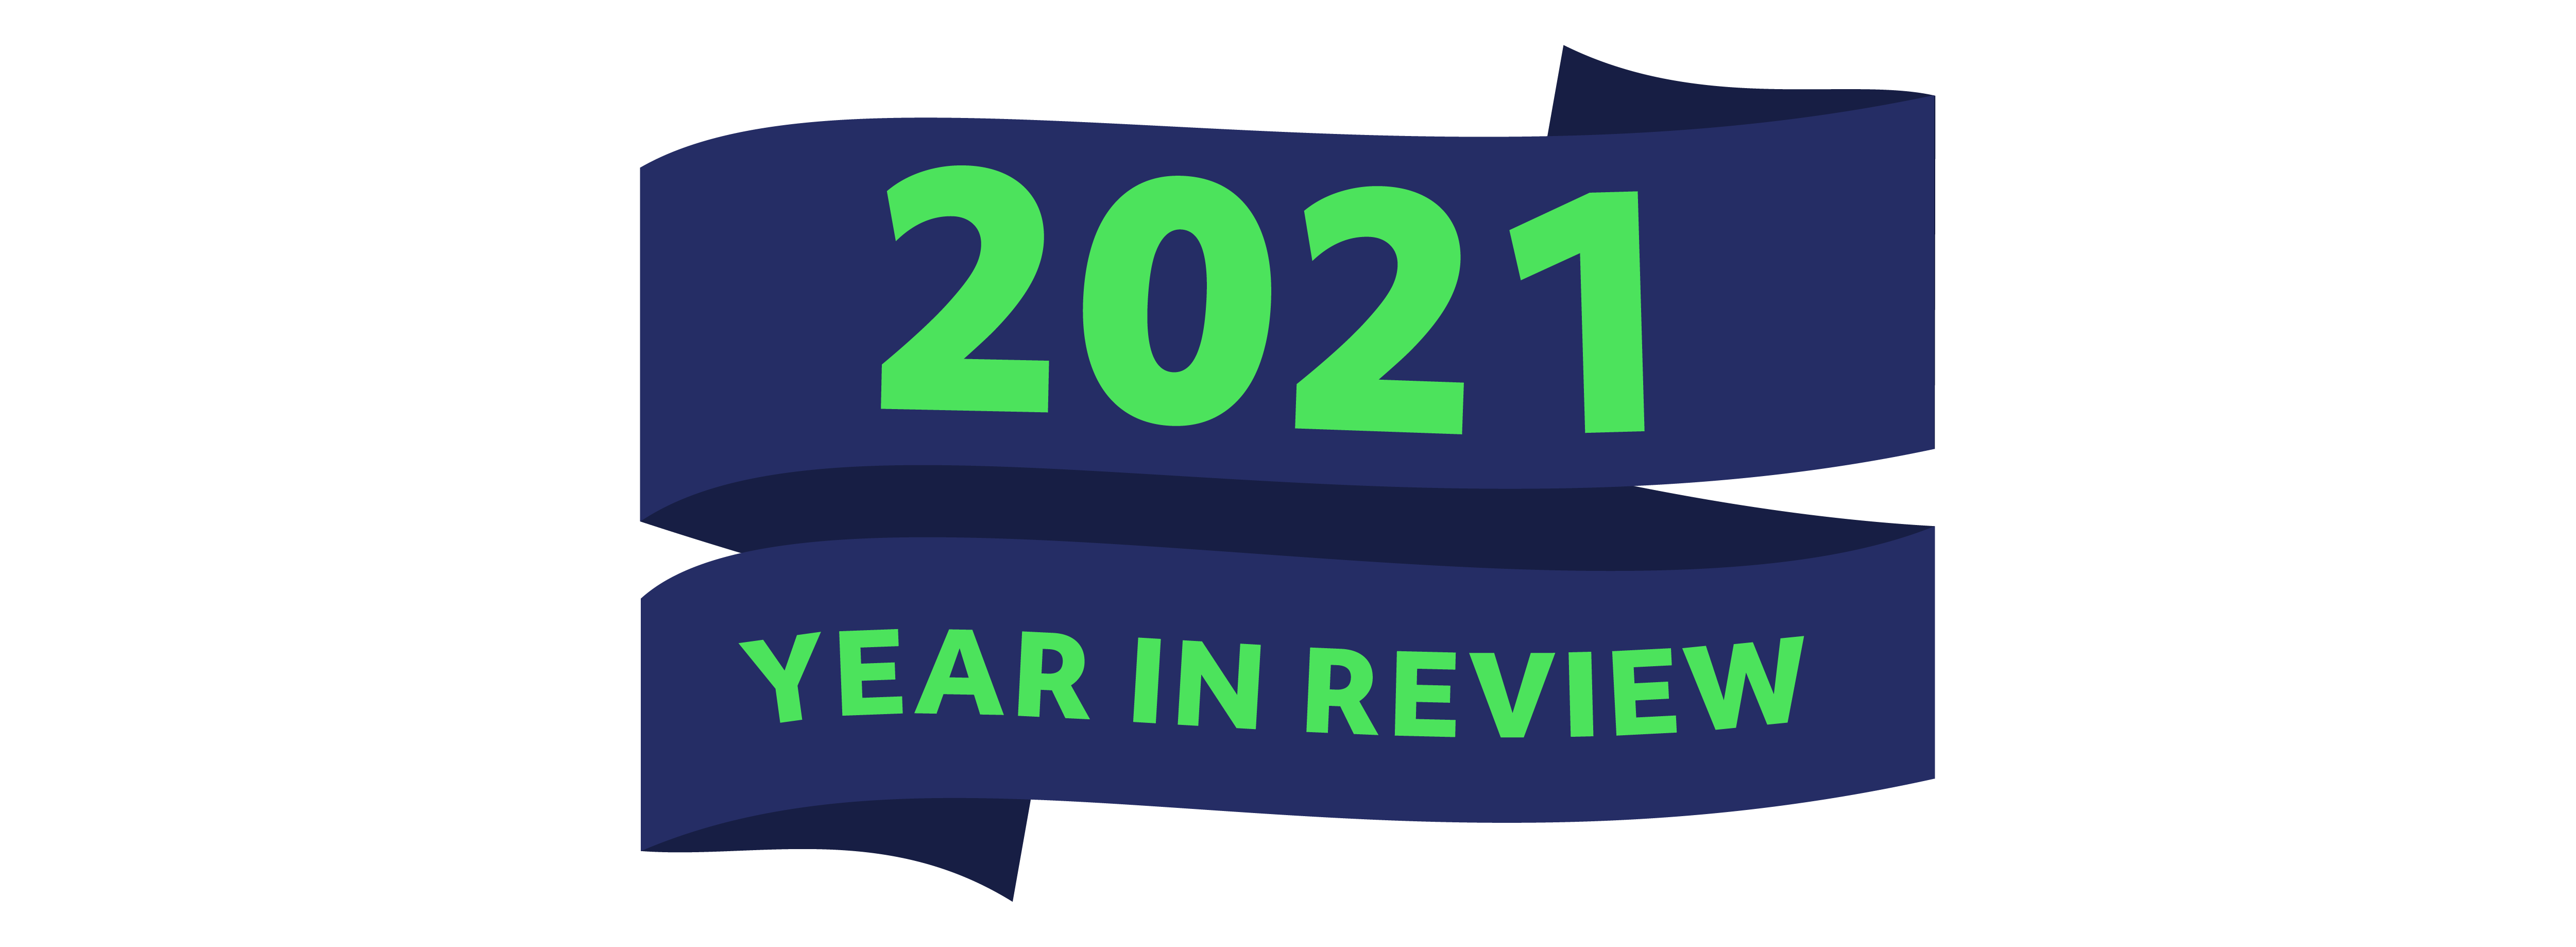 2021 Year in Review in navy blue ribbon style.